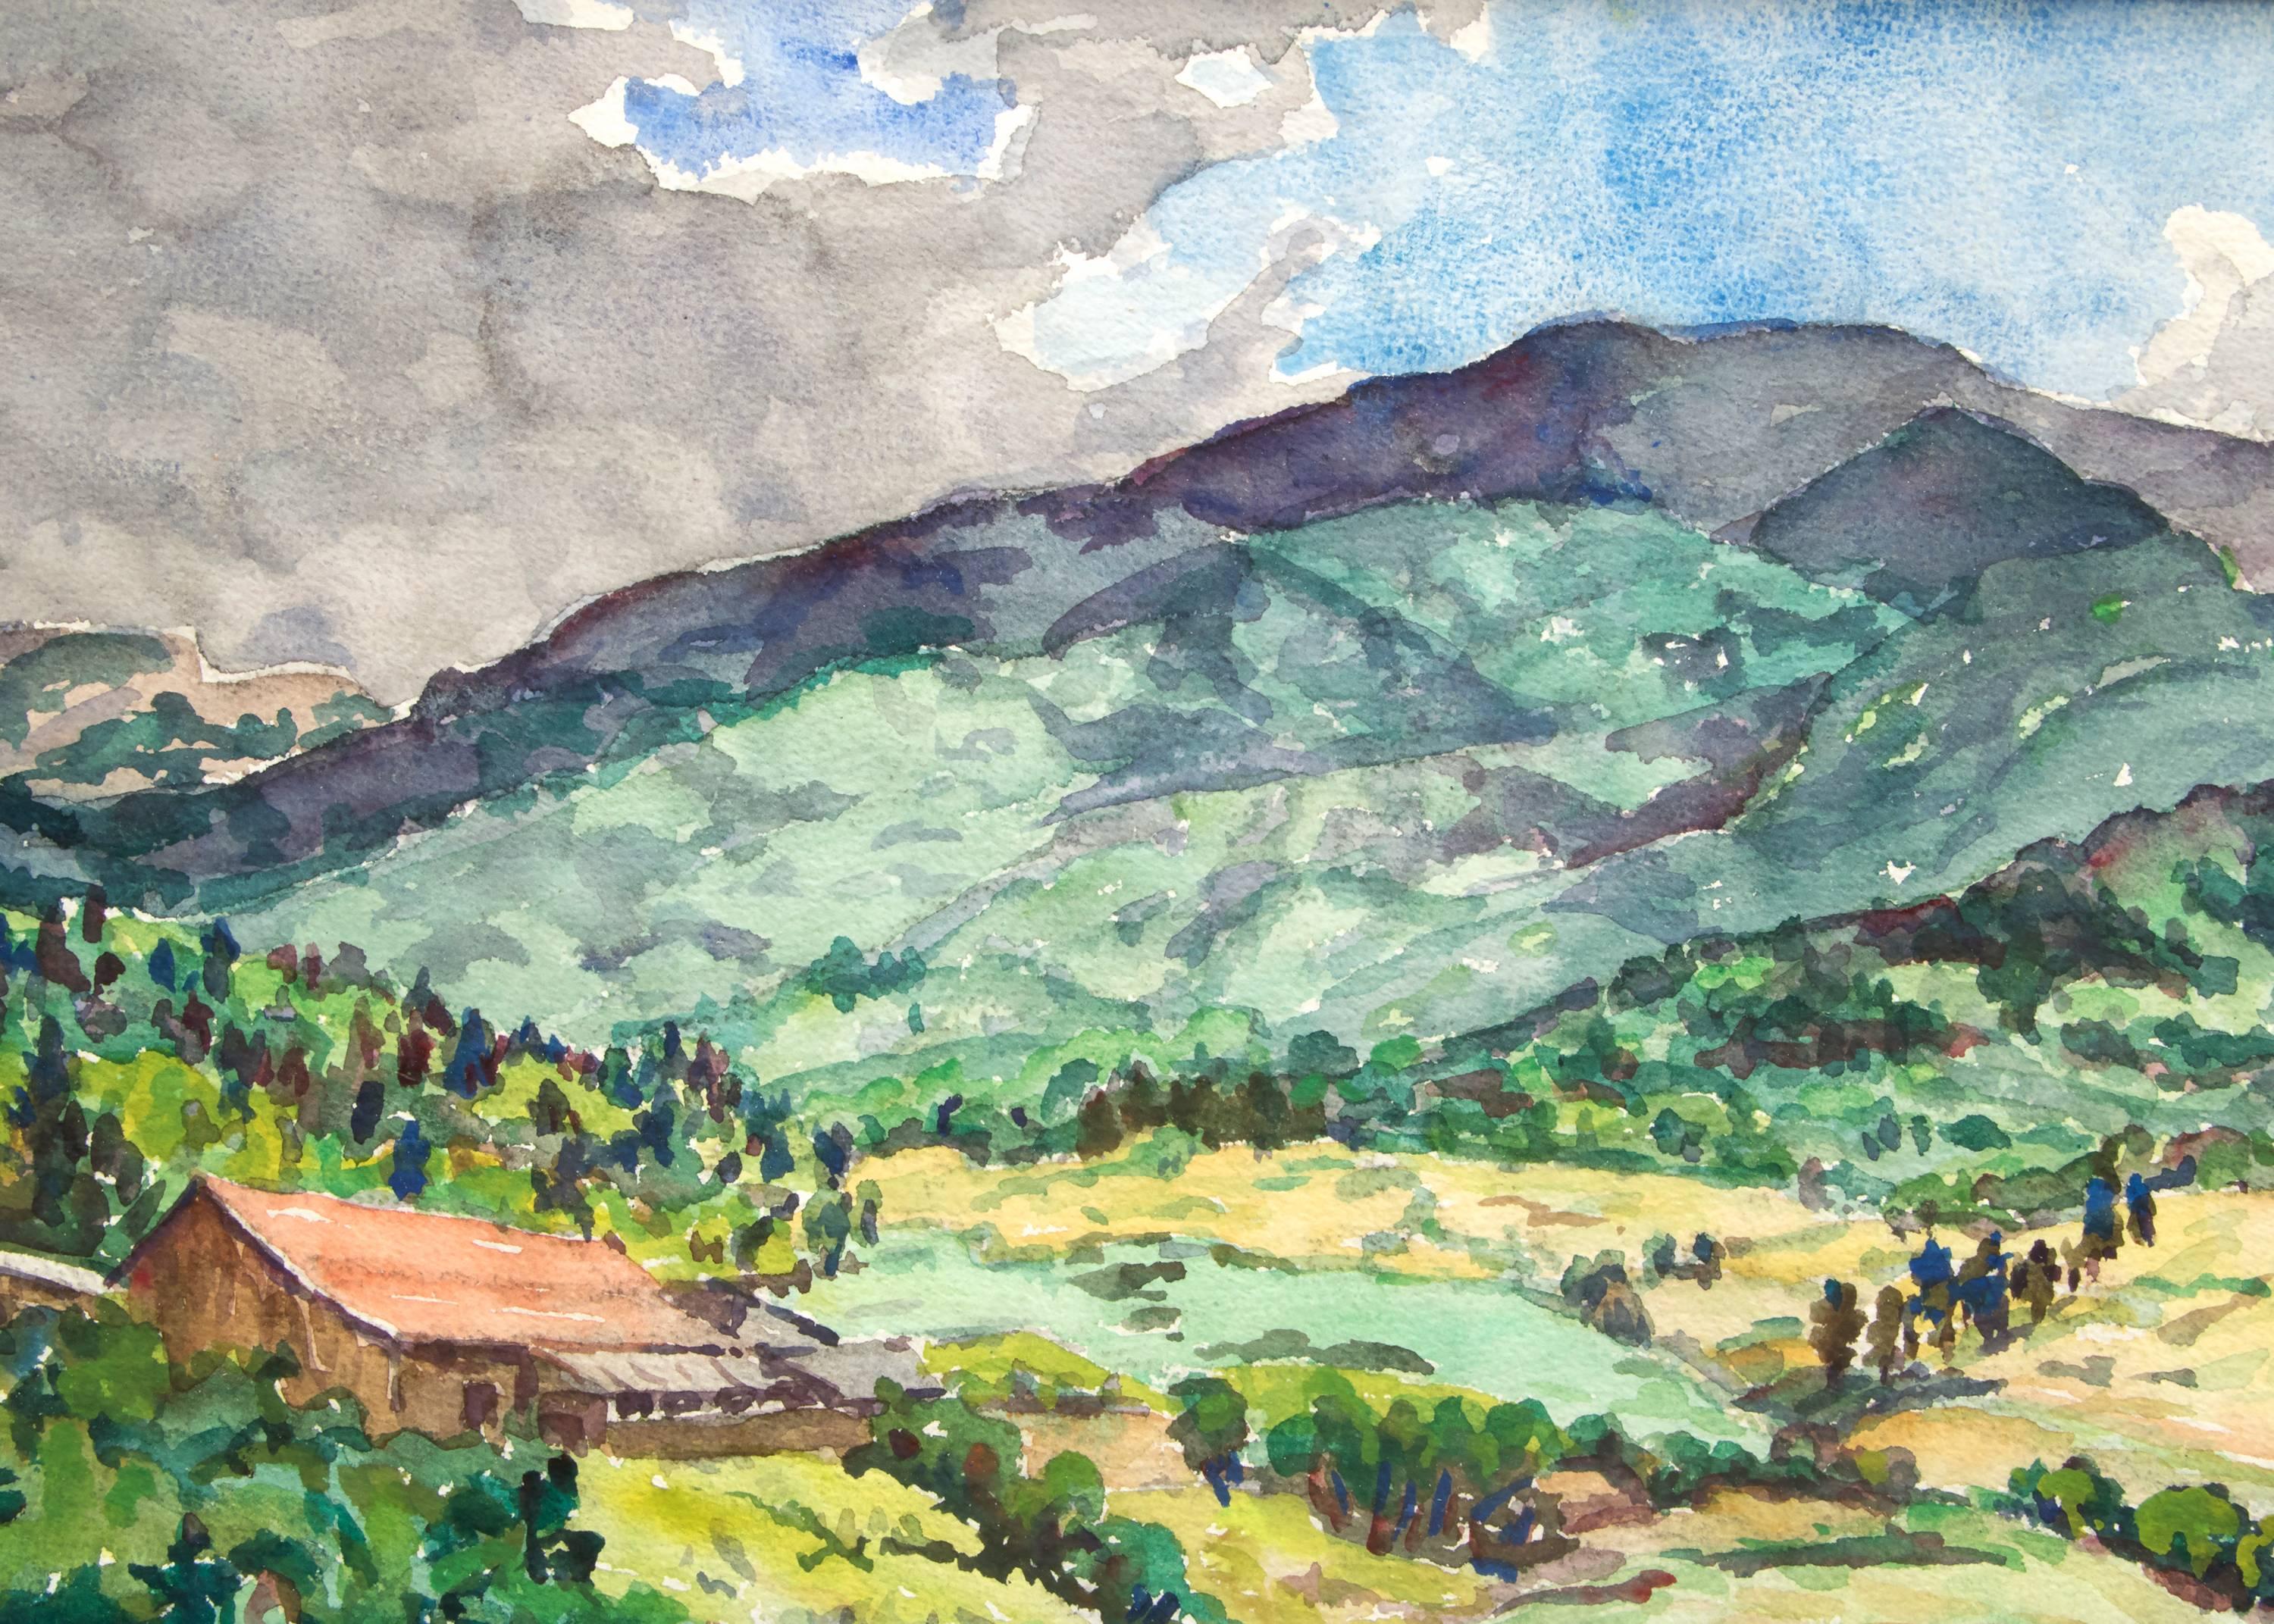 Mountain Ranch, Modern Summer Colorado Mountain Landscape, Watercolor Painting - Gray Landscape Painting by Irene D. Fowler